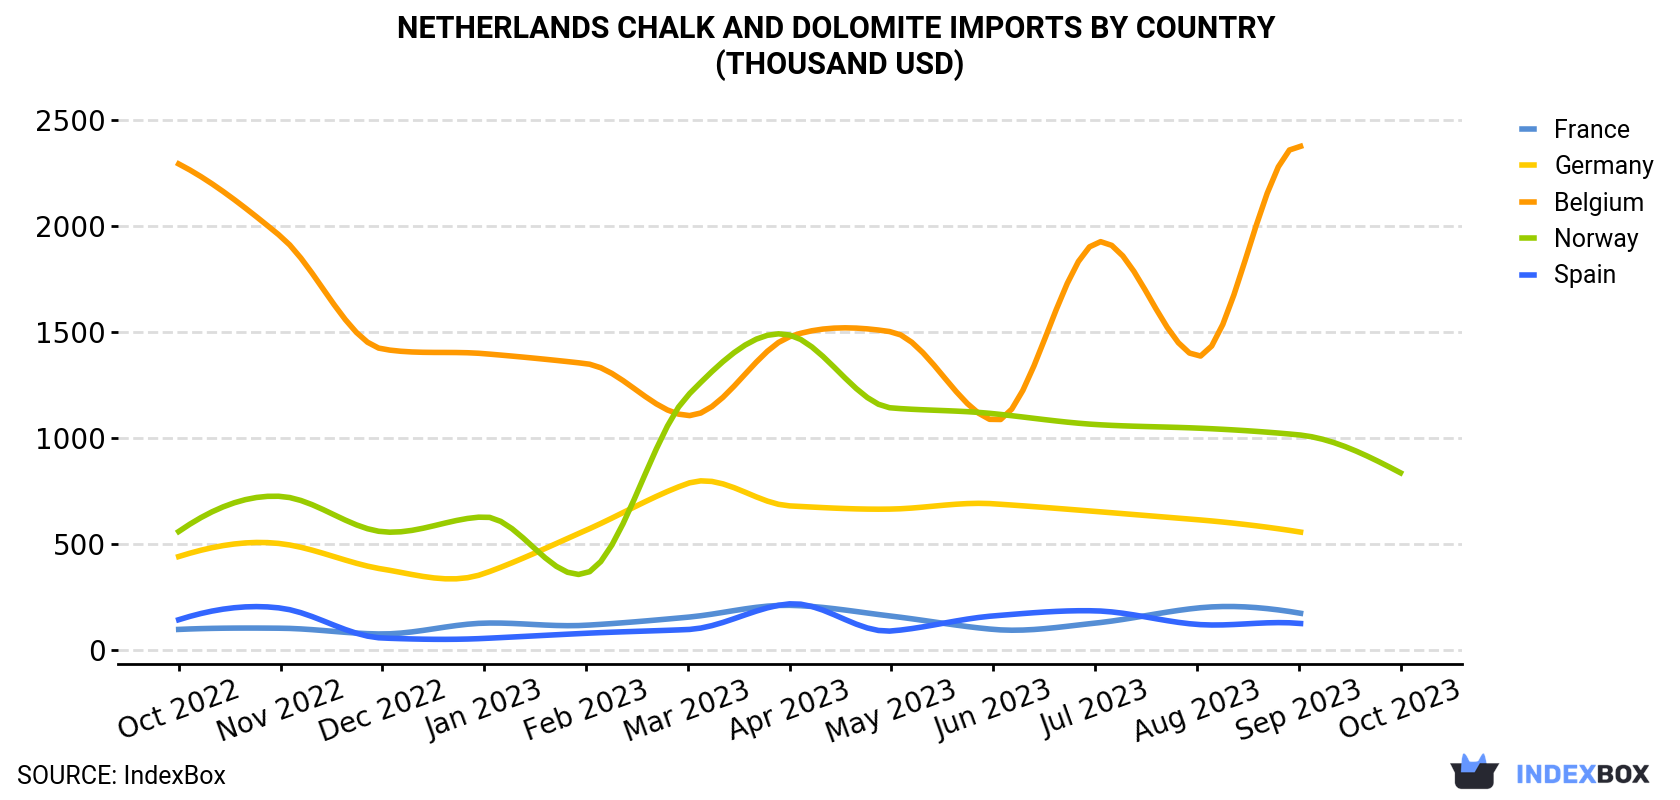 Netherlands Chalk And Dolomite Imports By Country (Thousand USD)